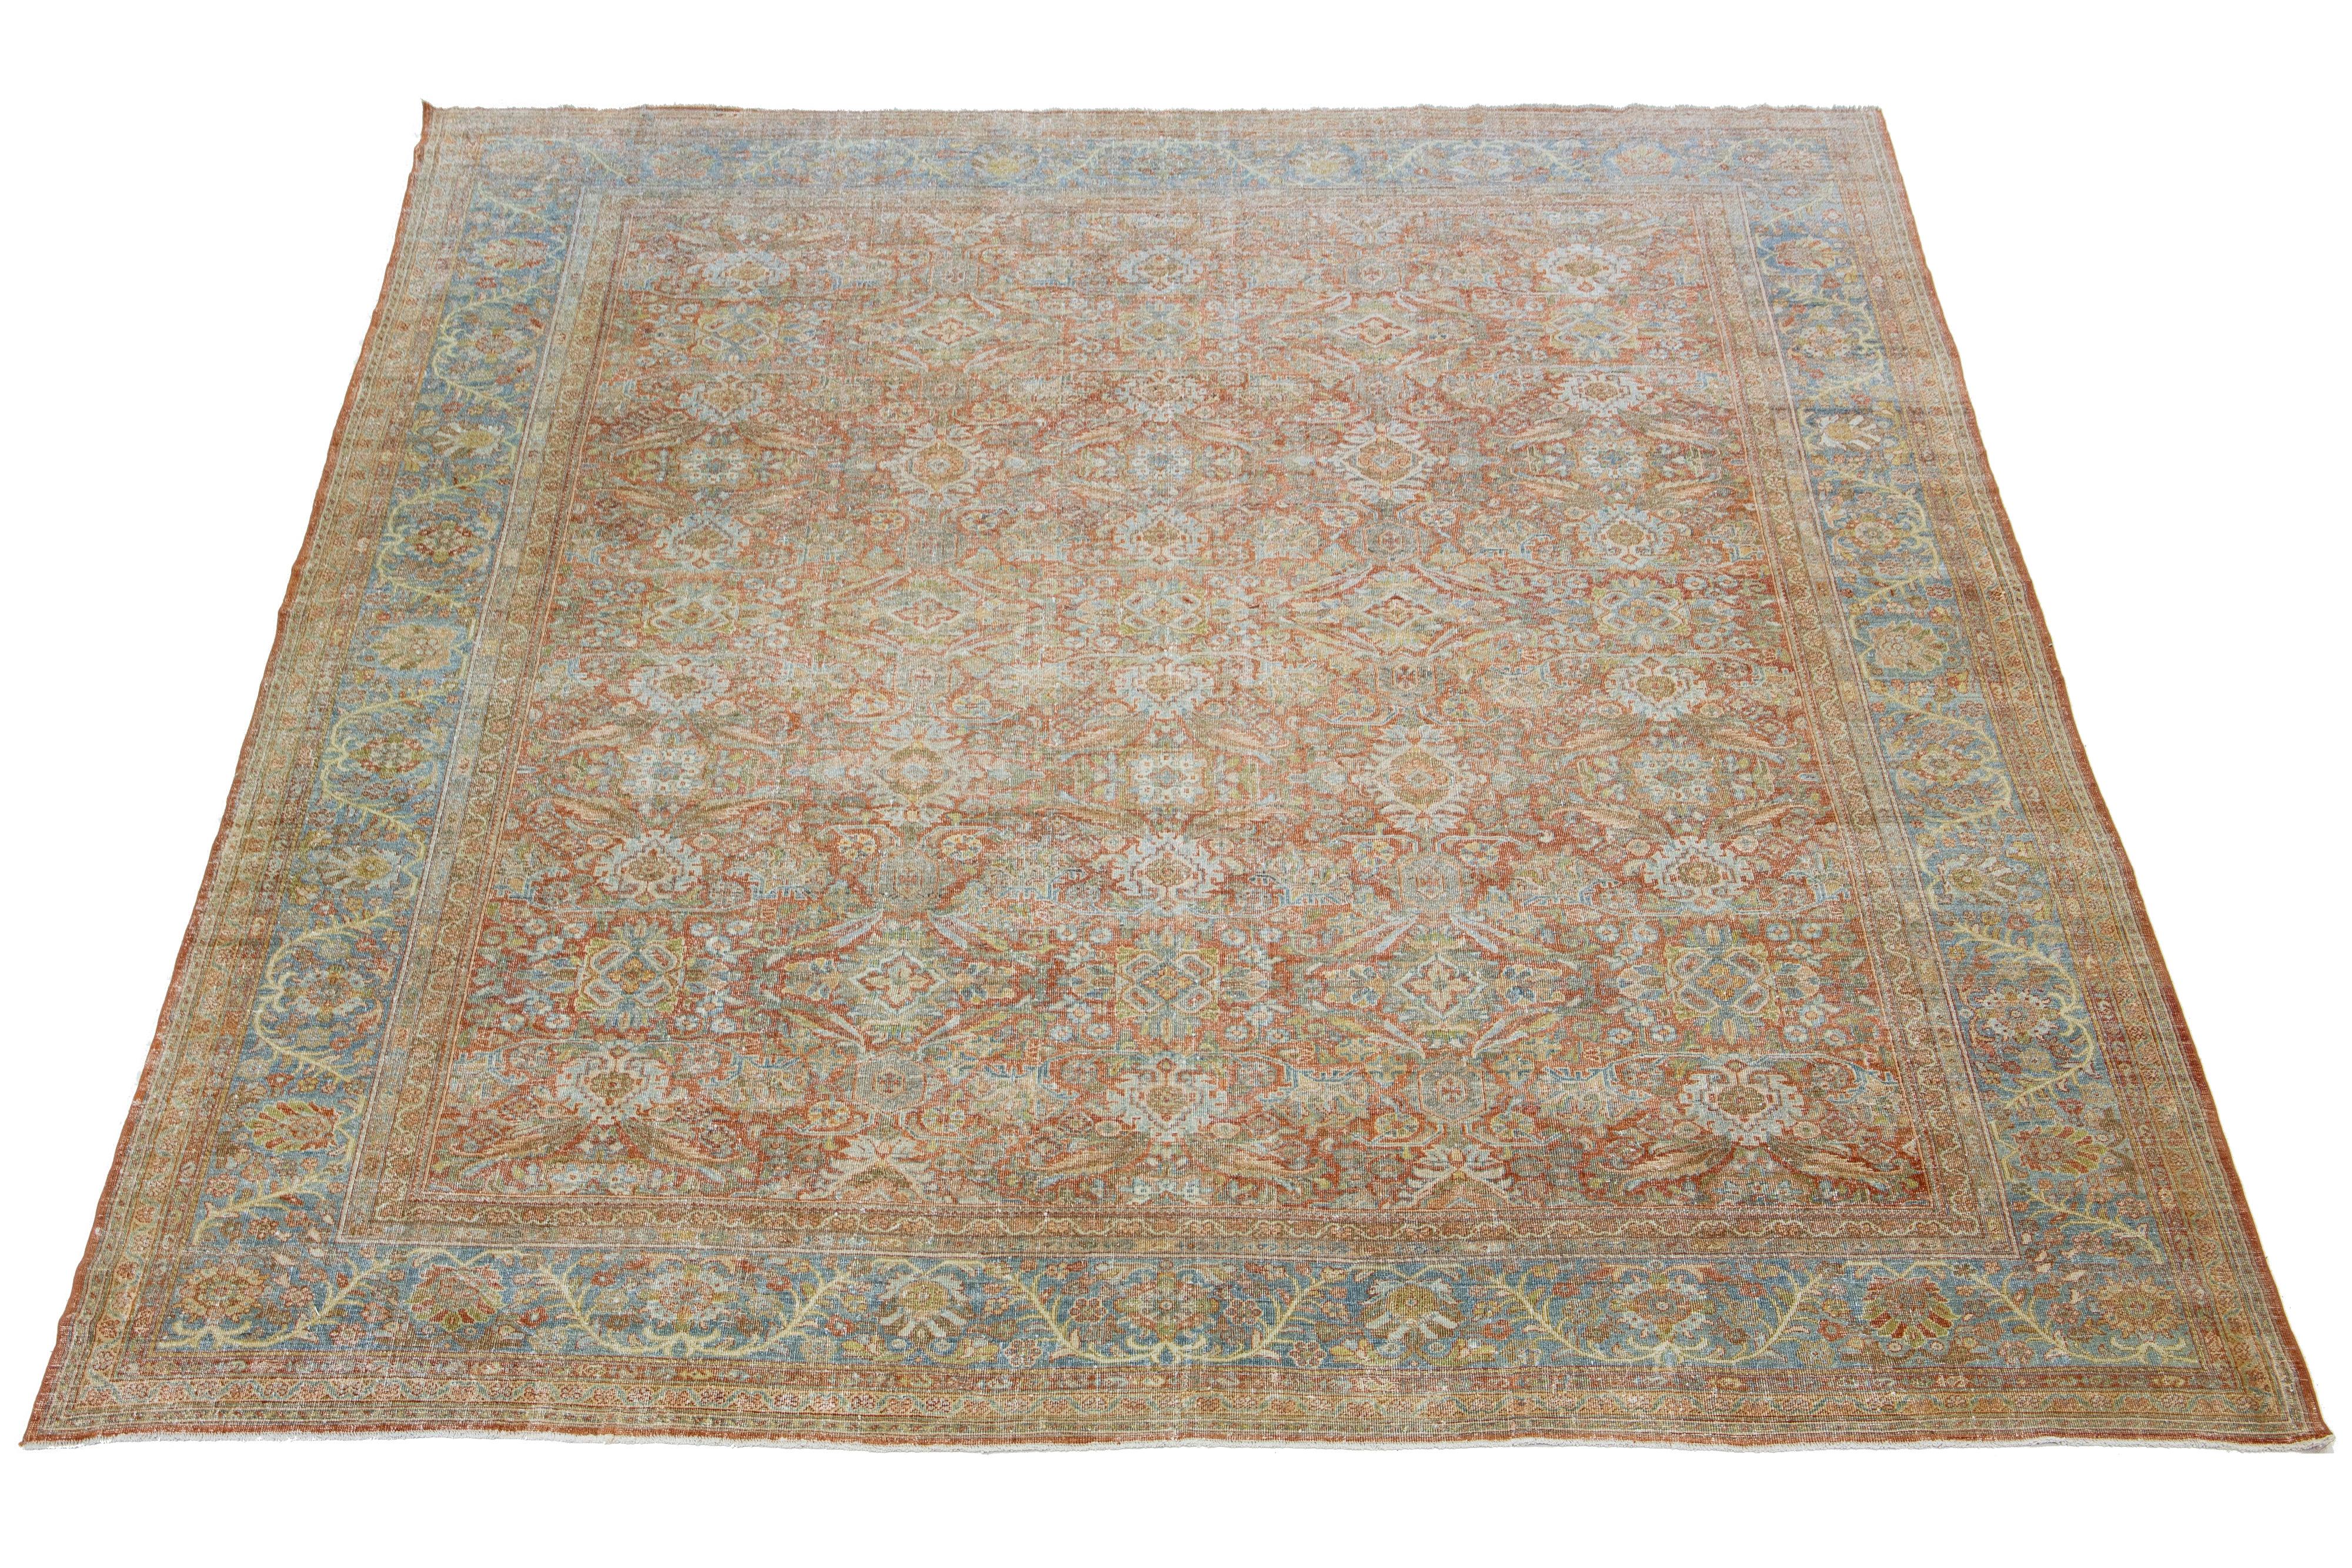 Beautiful Antique Mahal hand-knotted wool rug with a rust color field. This Persian rug has classic blue, green, beige, and brown hues throughout the floral motif.

This rug measures 11'10' X 14'.
     